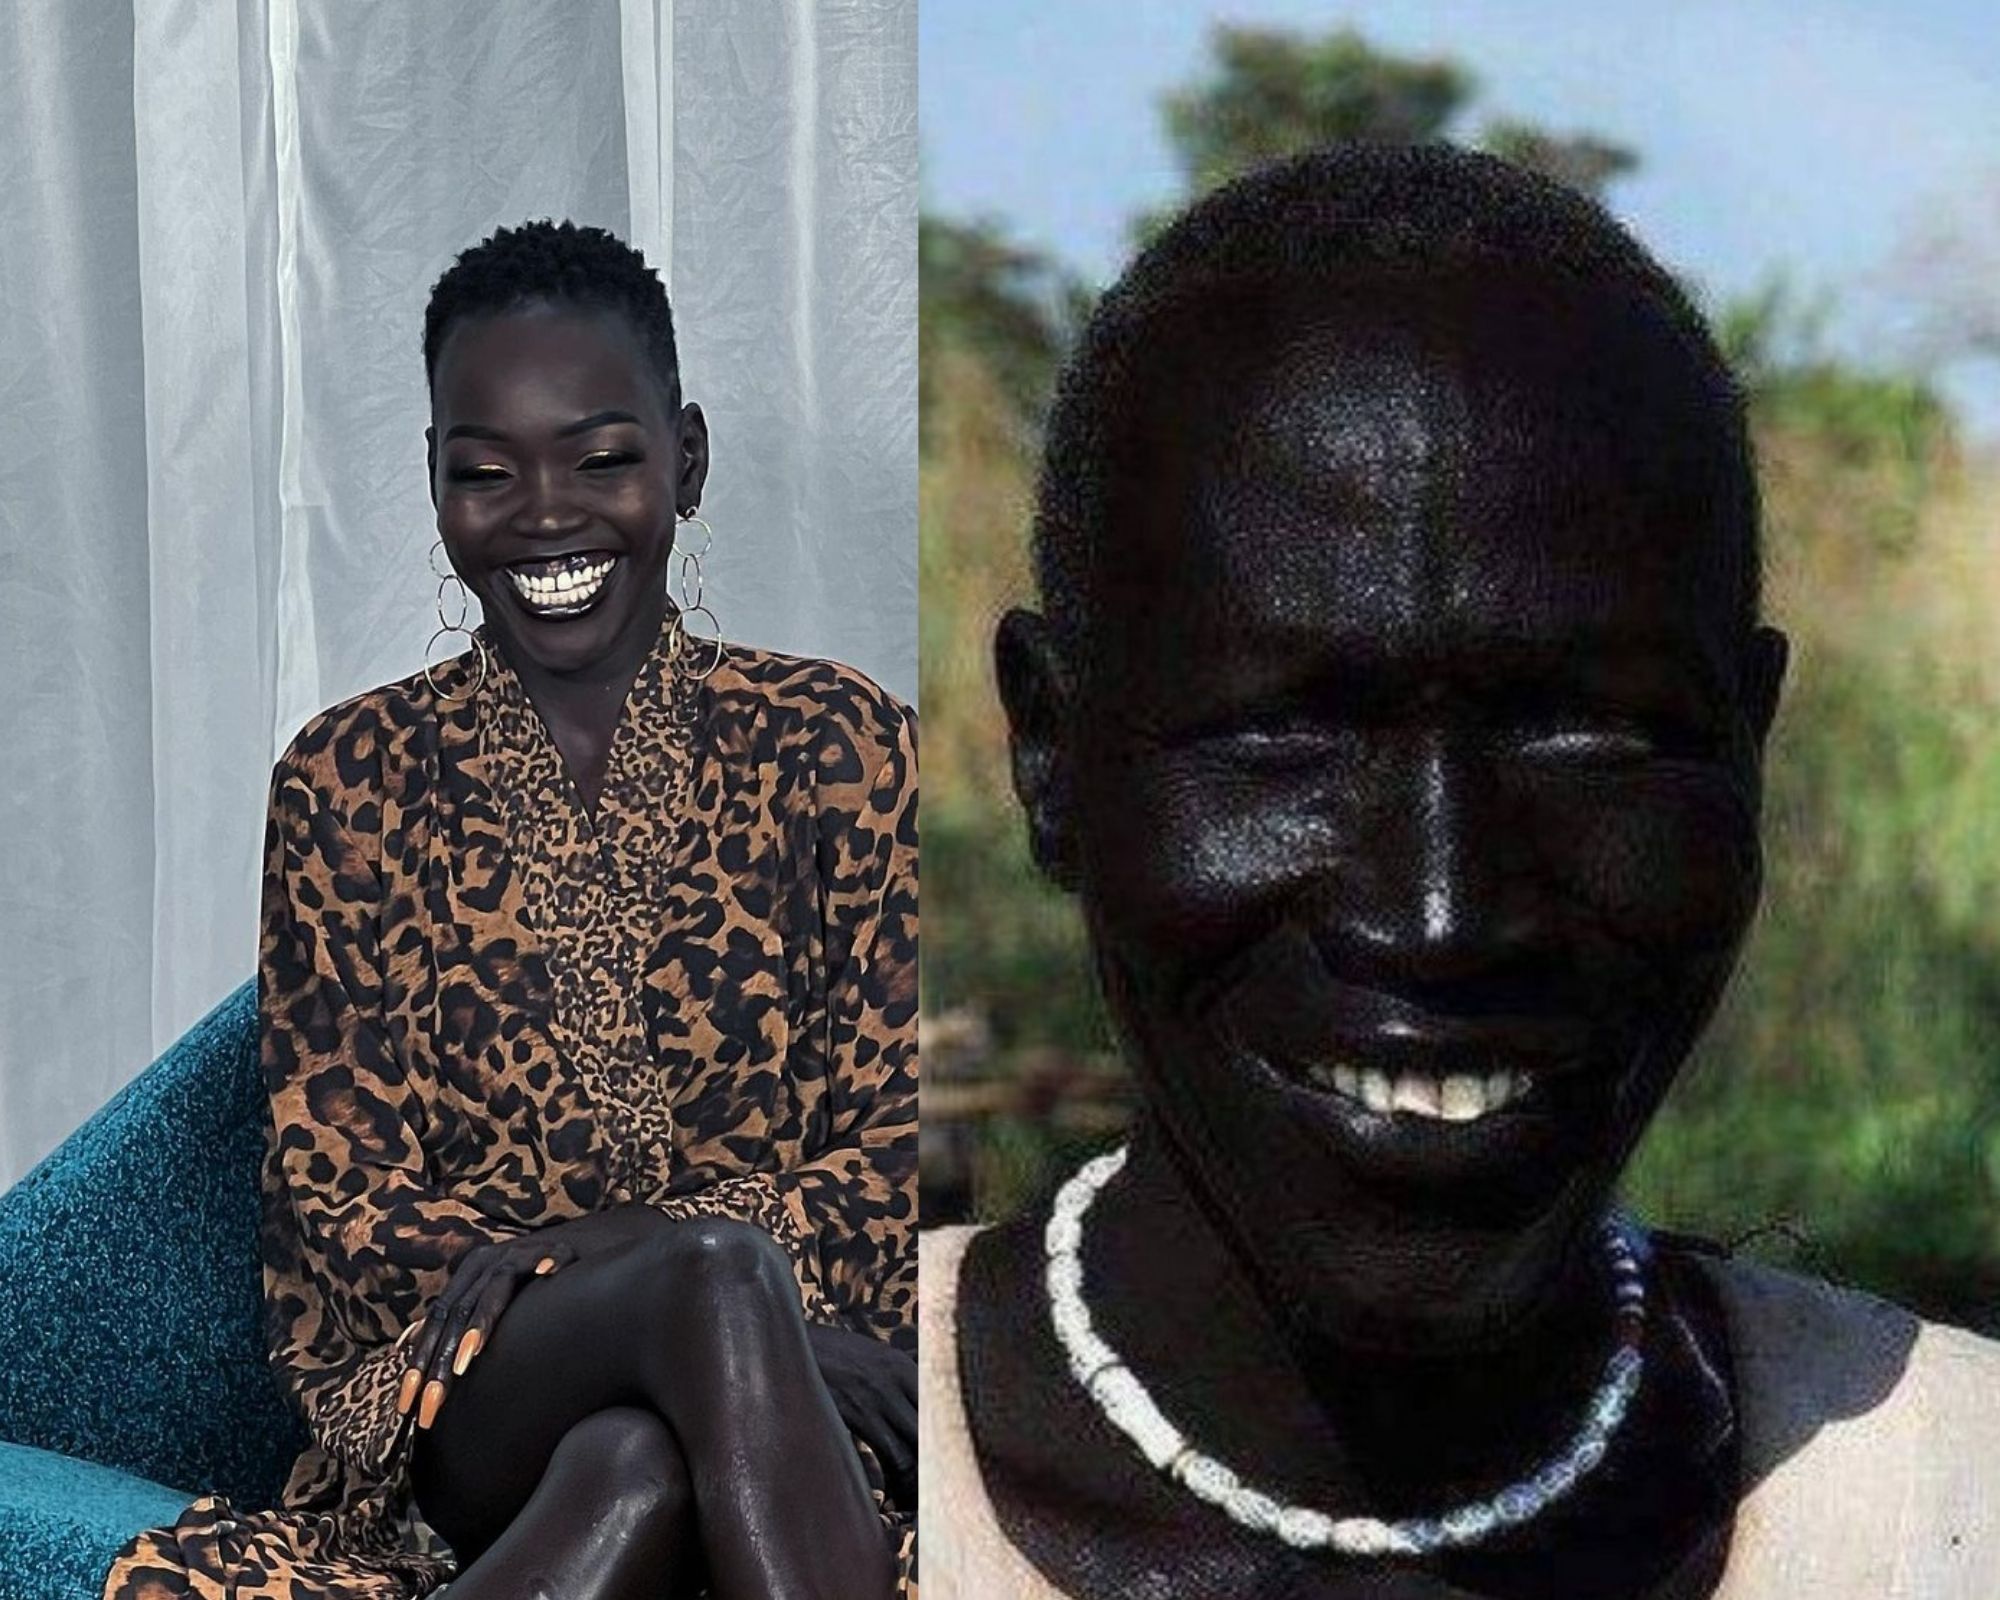 Who is the blackest person in the world, and is there a Guinness World Record for it?